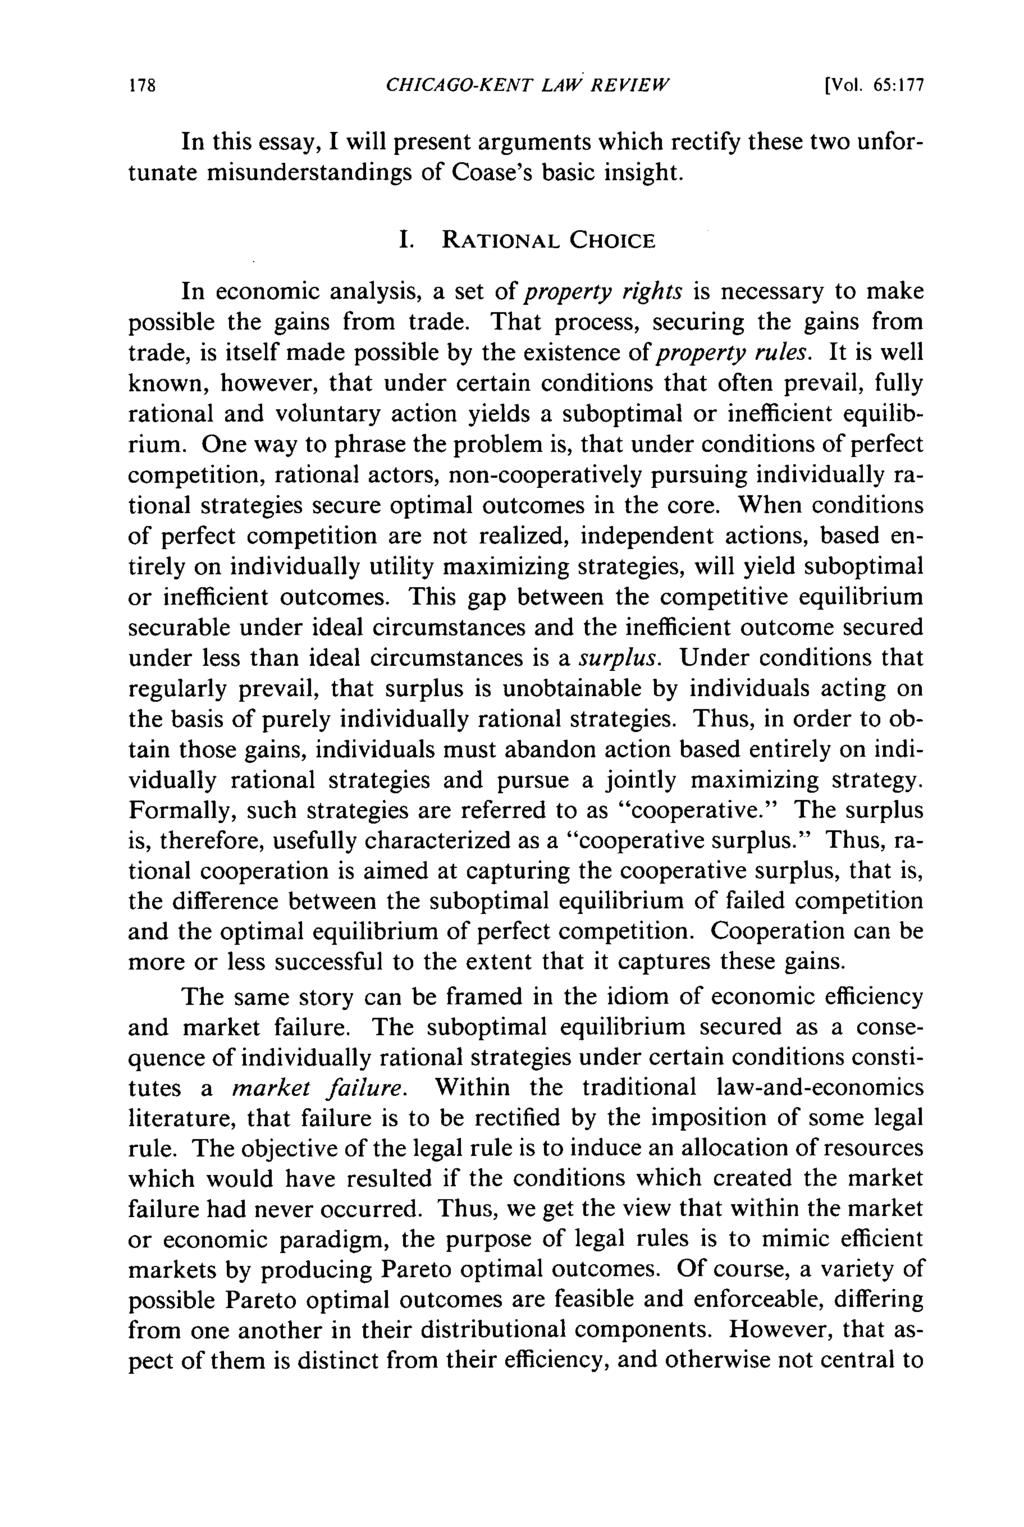 CHICAGO-KENT LAW REVIEW [Vol. 65:177 In this essay, I will present arguments which rectify these two unfortunate misunderstandings of Coase's basic insight. I. RATIONAL CHOICE In economic analysis, a set of property rights is necessary to make possible the gains from trade.